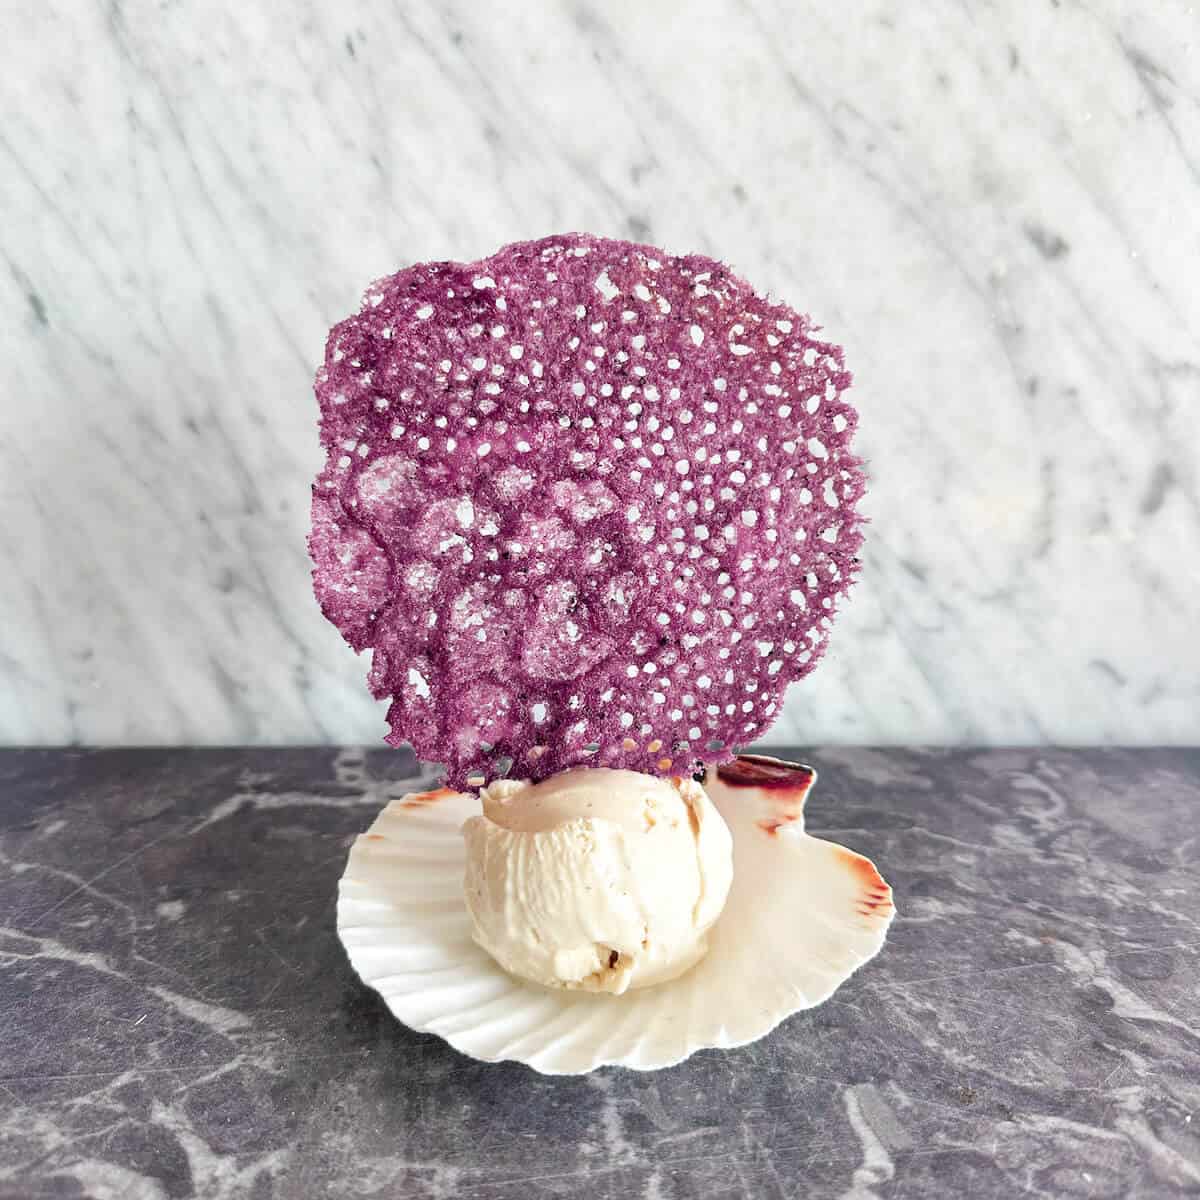 A purple coral tuile garnish on a scoop of ice cream served on a shell.